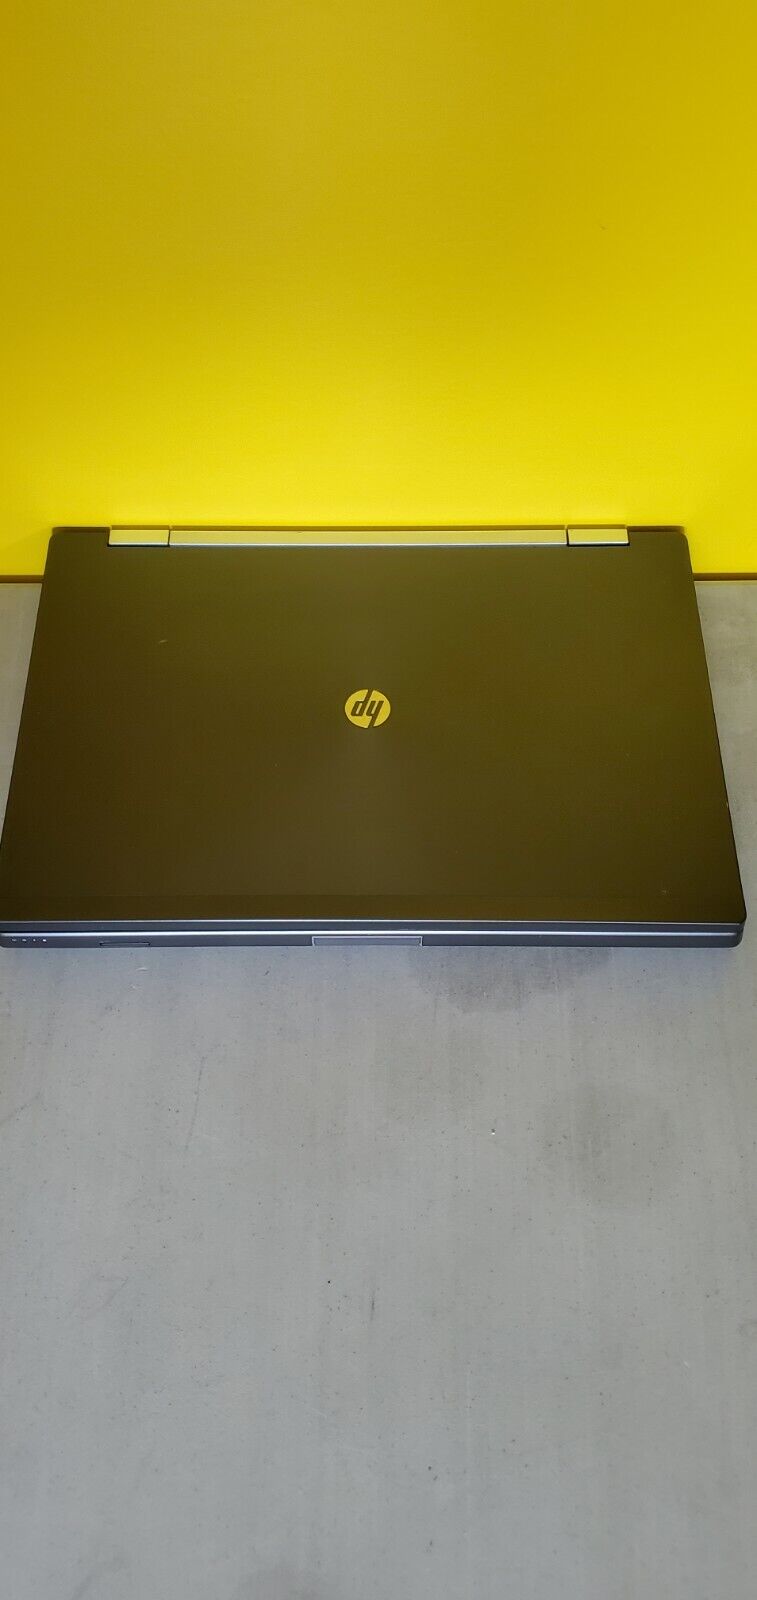 HP EliteBook 8560w  I7core Windows7 No Power Cord PARTS ONLY